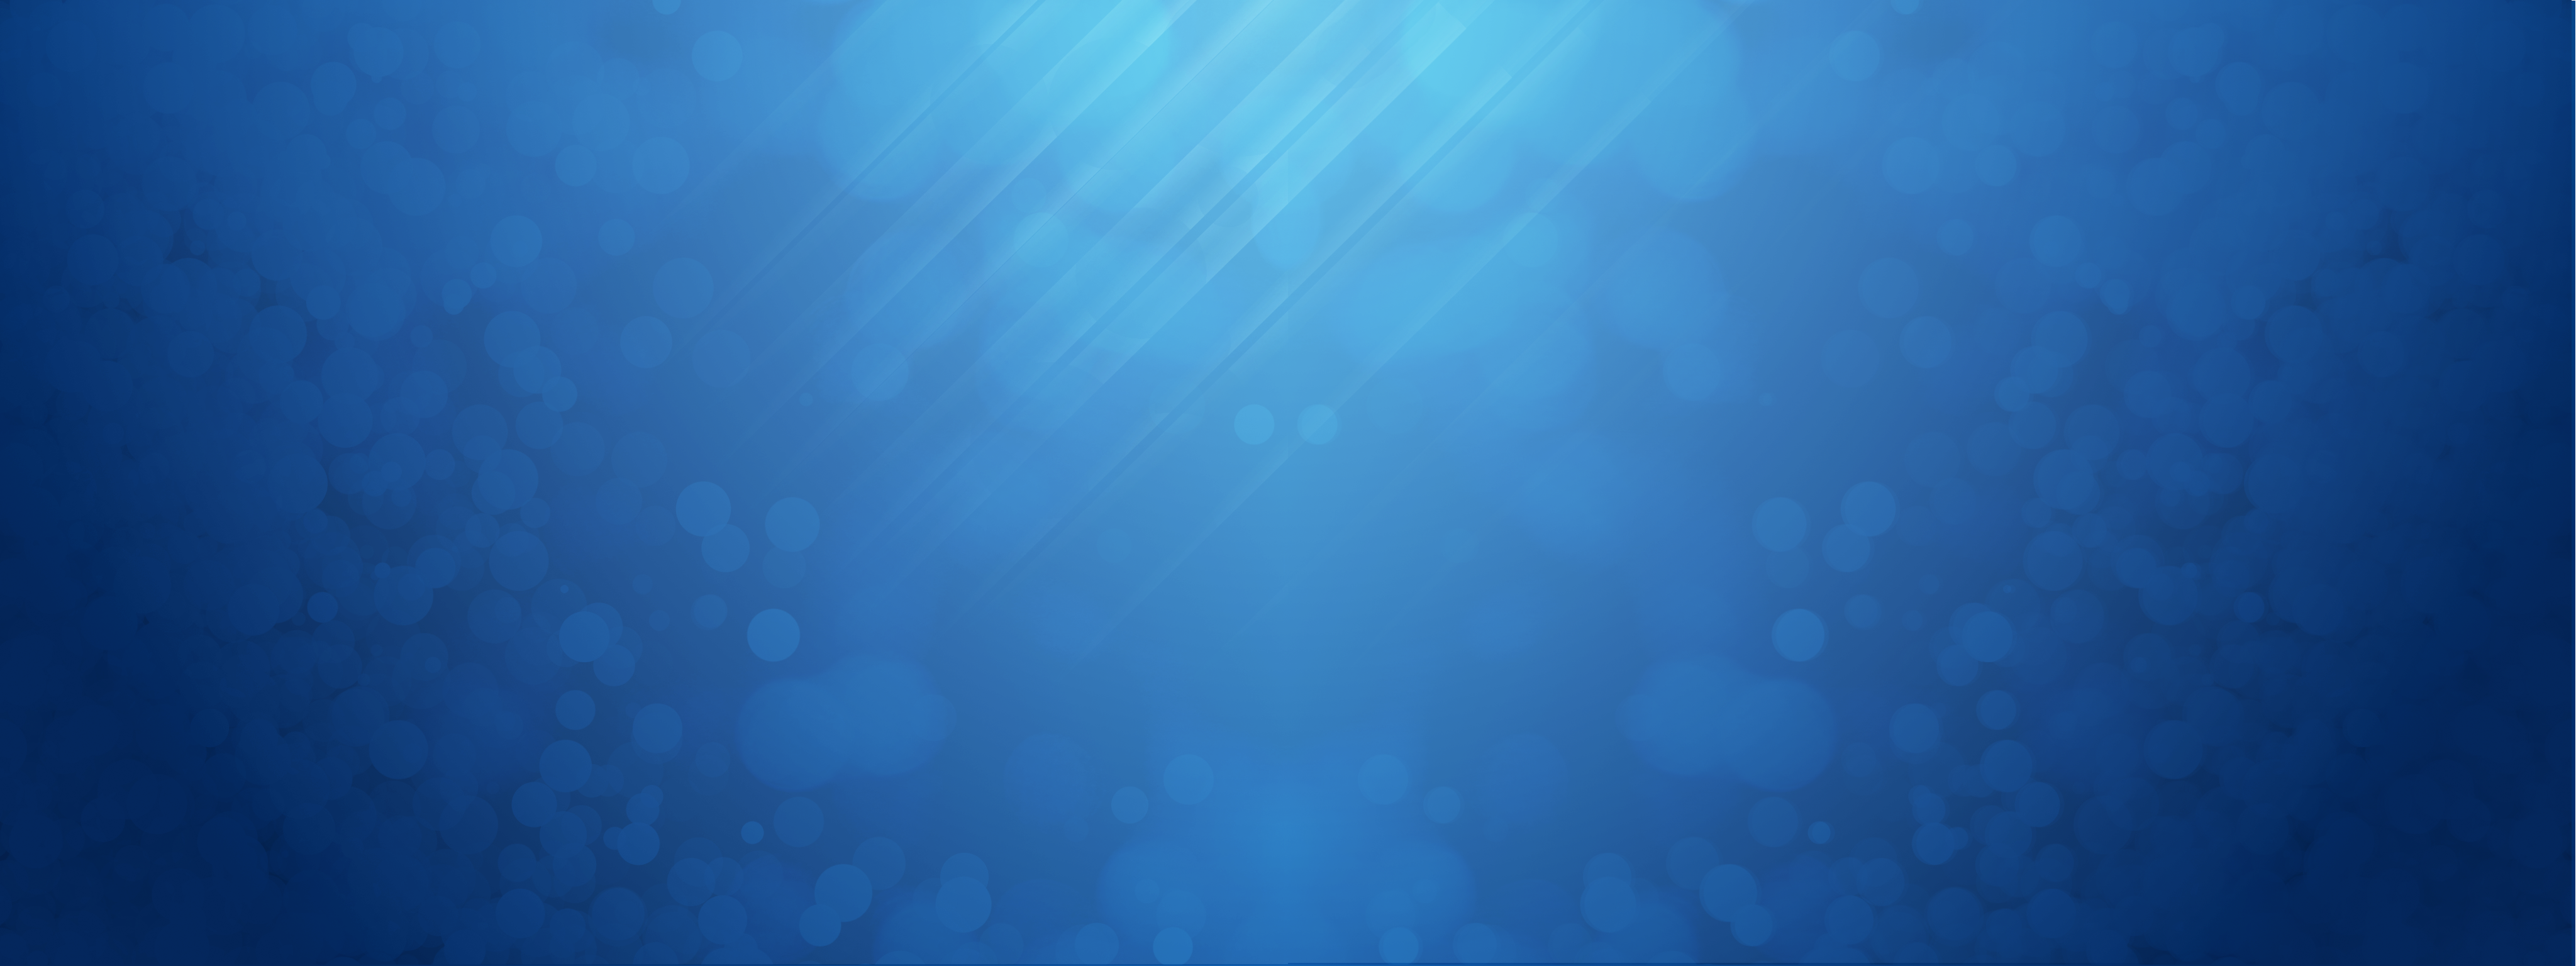 Fedora Superfedora Simple Wallpaper From The Pack Versions